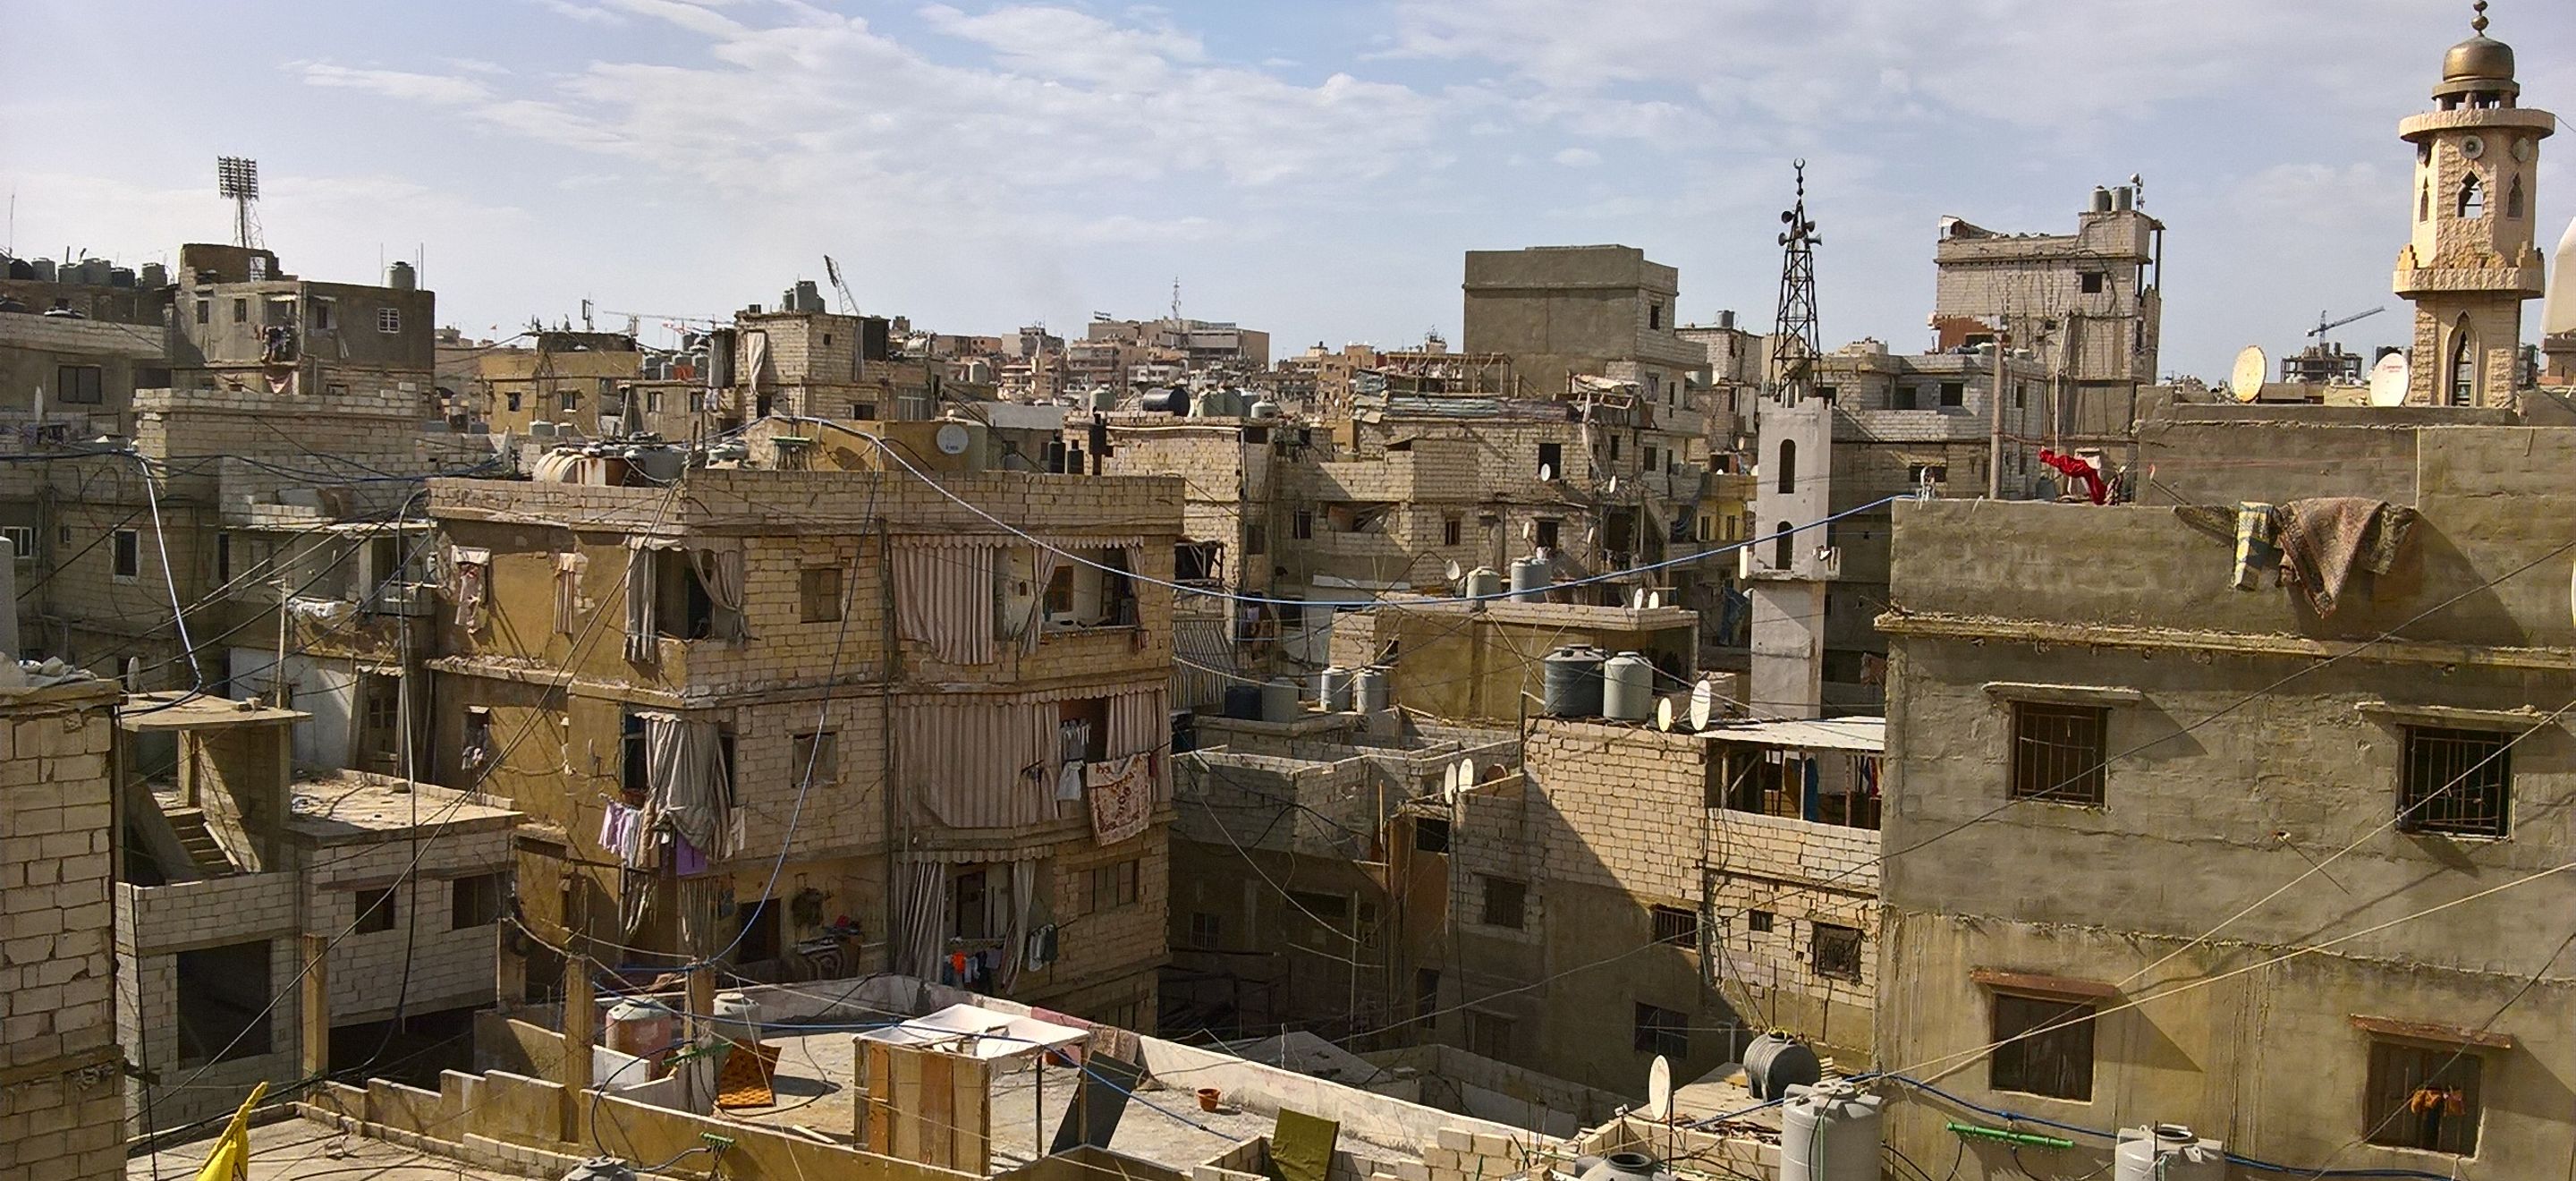 An image of the southern Beirut skyline from the Shatila refugee camp. There are many cinderblock buildings with electrical wires running from roof to roof.